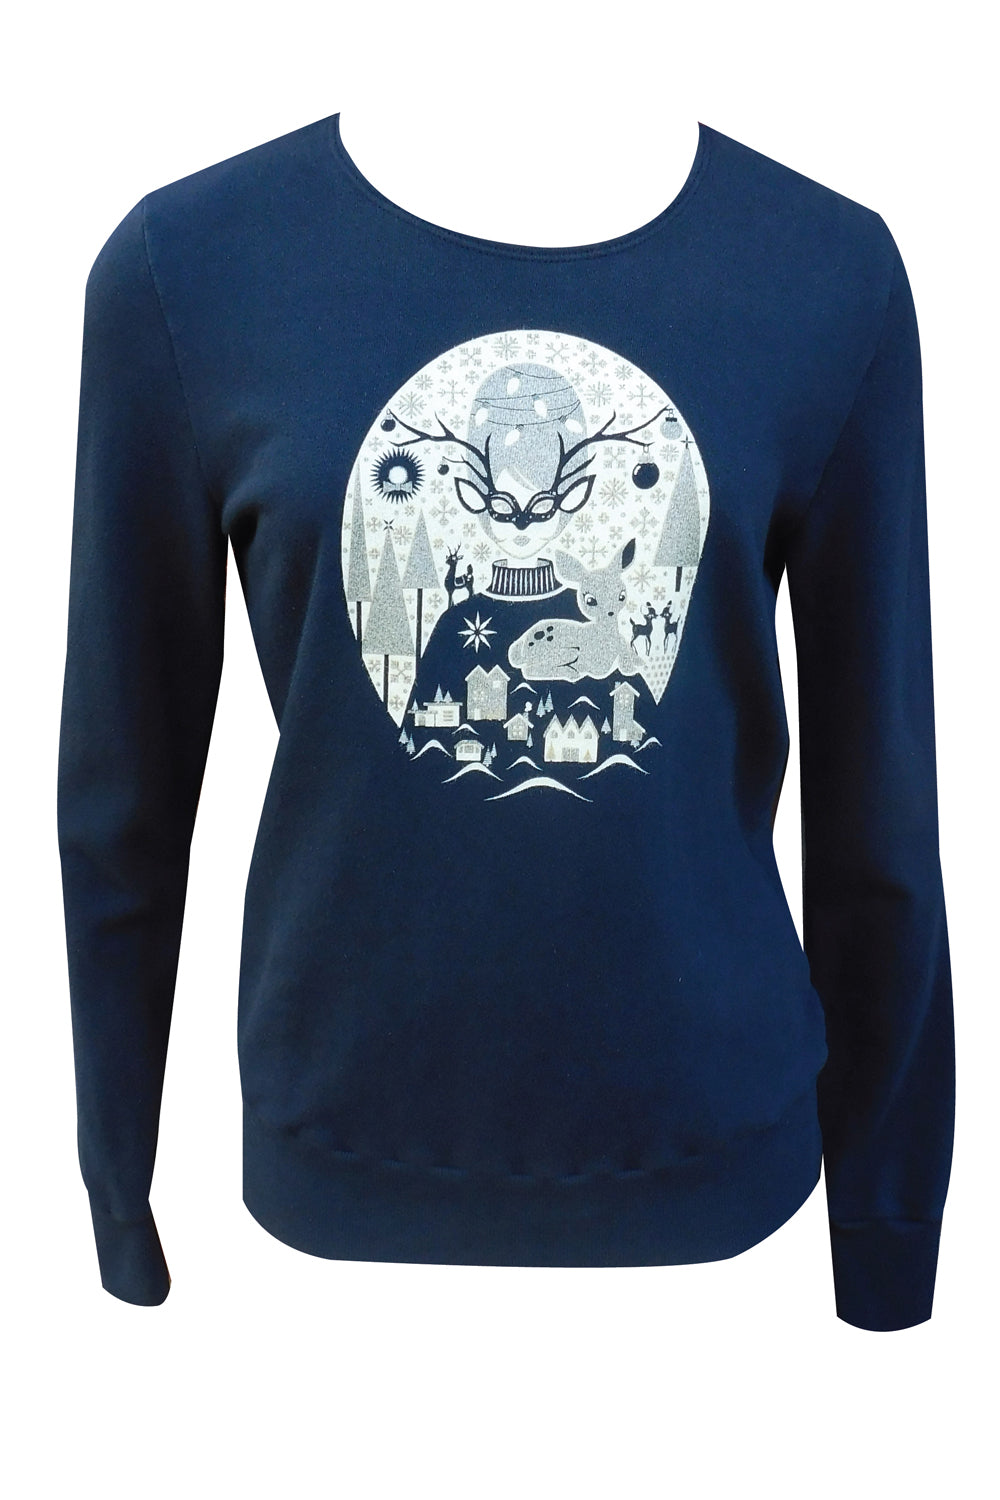 Black French terry pullover with sparkly gold and white print of Christmas girl with mask, reindeer, and pine trees